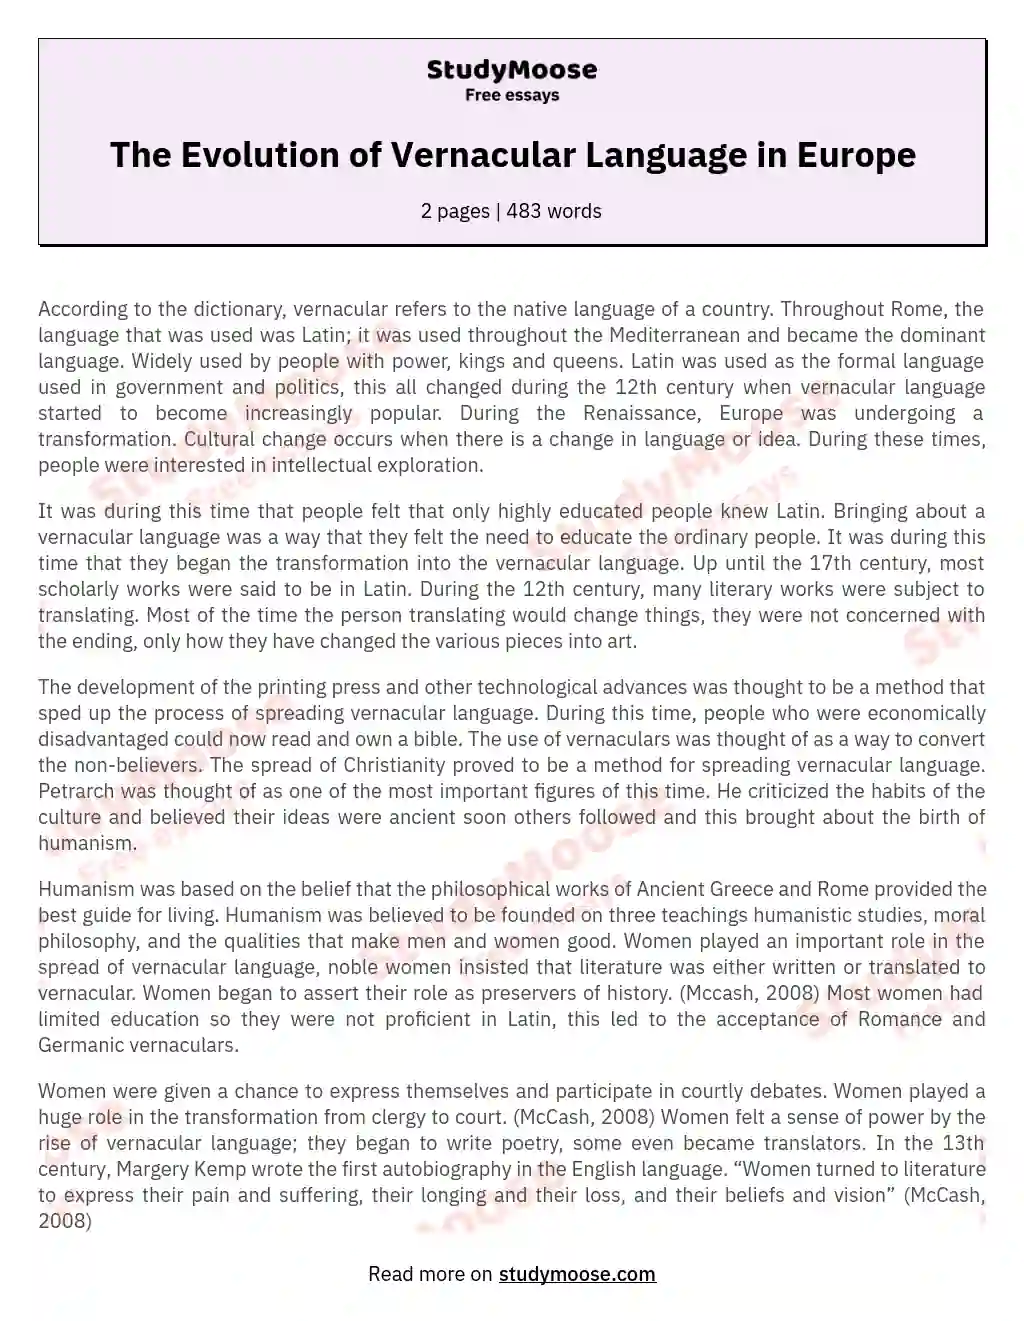 The Evolution of Vernacular Language in Europe essay